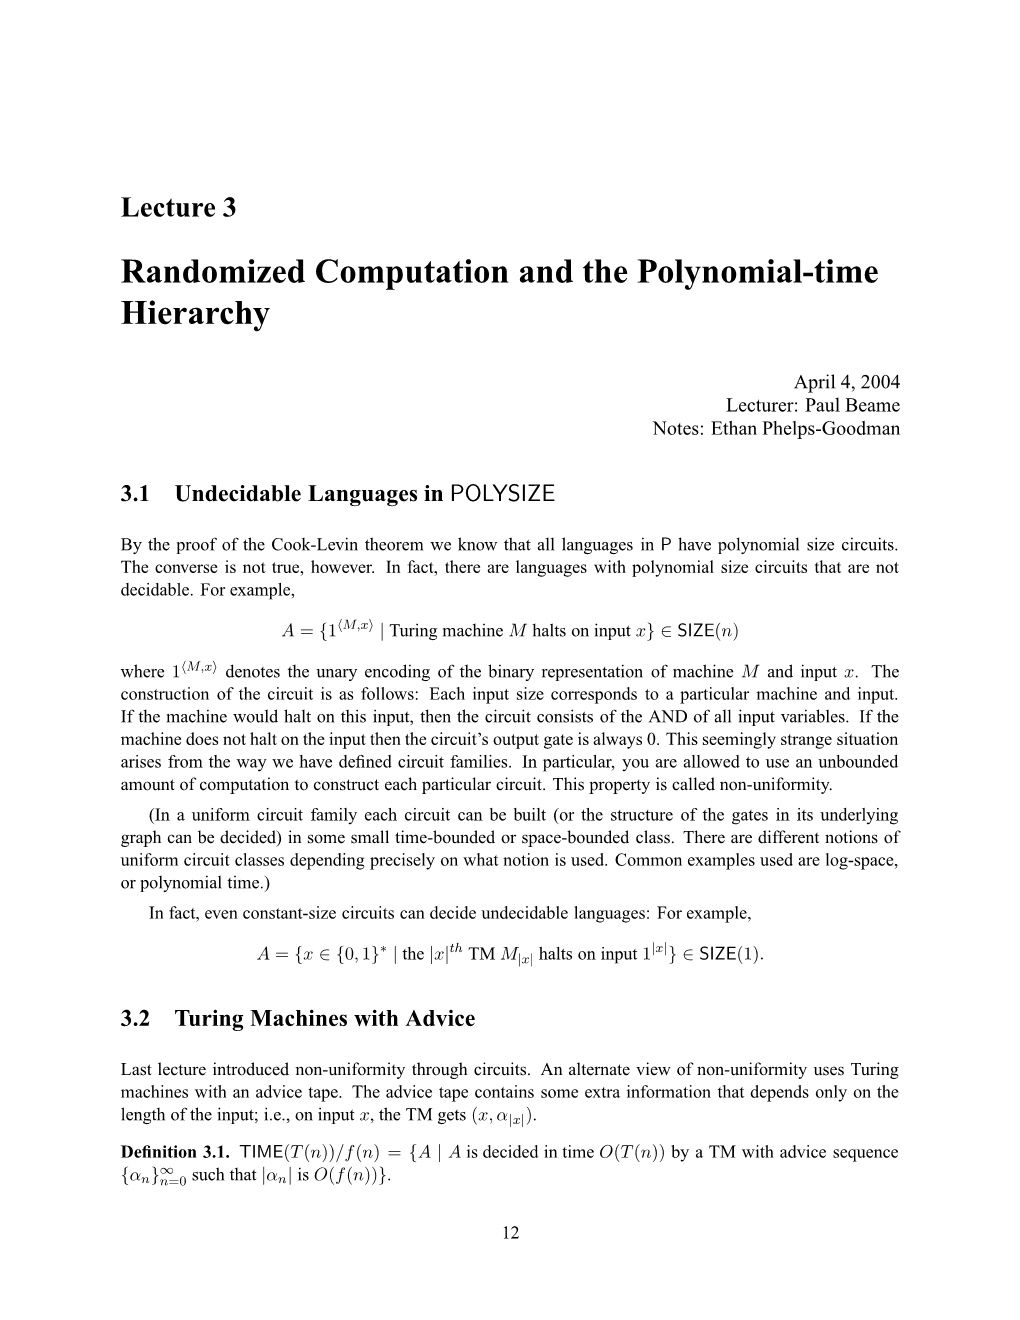 Lecture 3 Randomized Computation and the Polynomial-Time Hierarchy